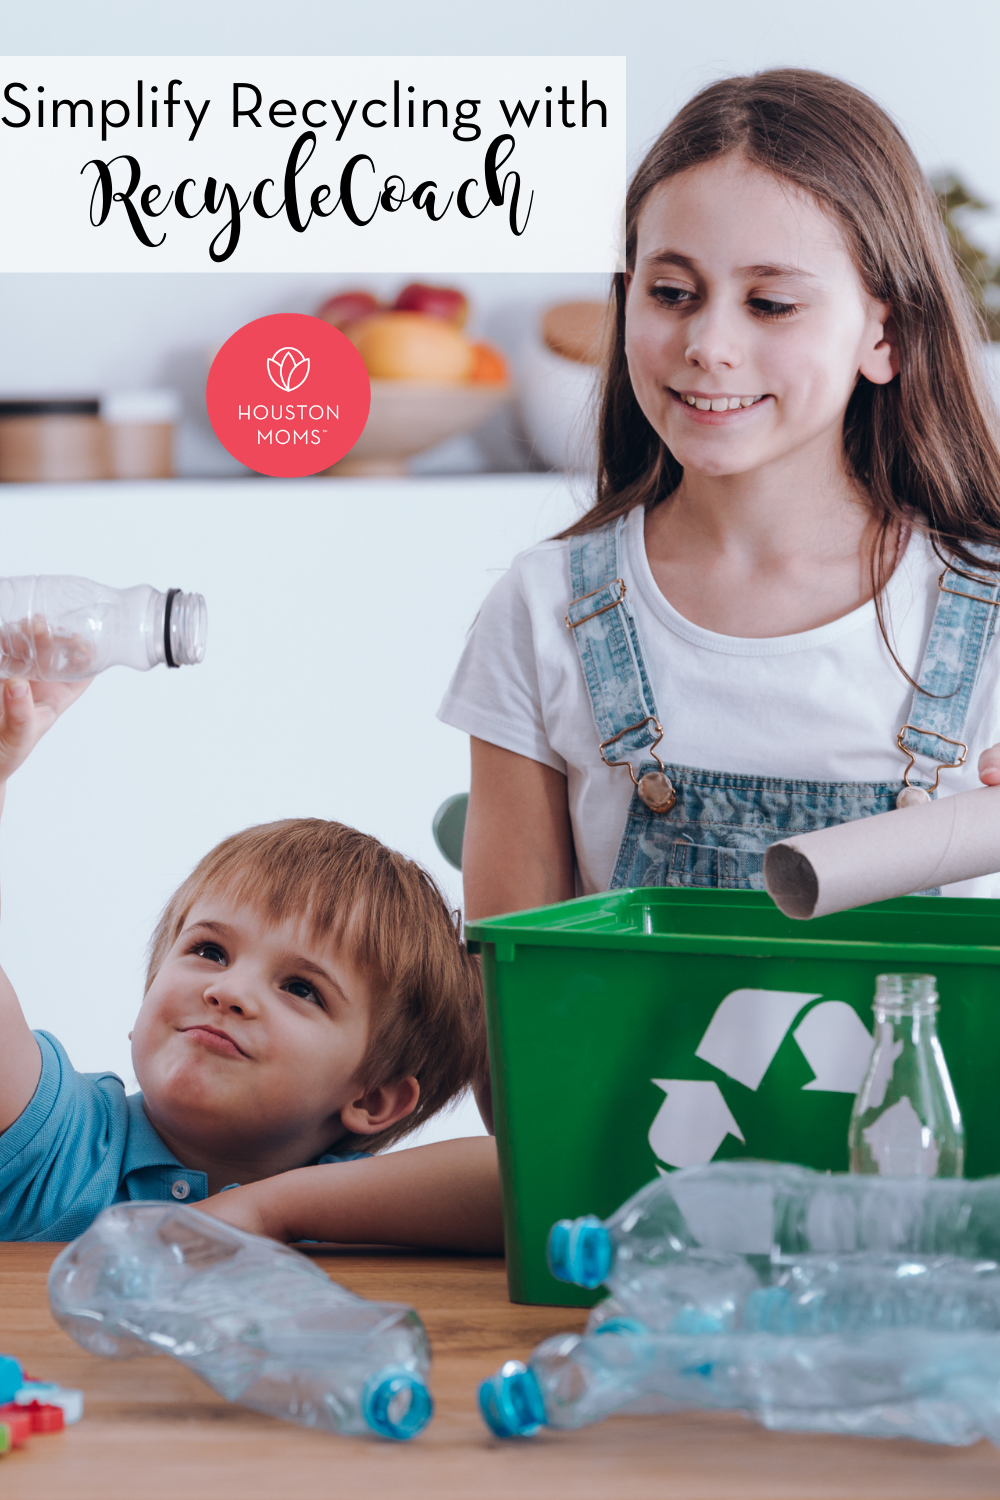 Houston Moms "Simplify Recycling with RecycleCoach" #houstonmoms #houstonmomsblog #momsaroundhouston